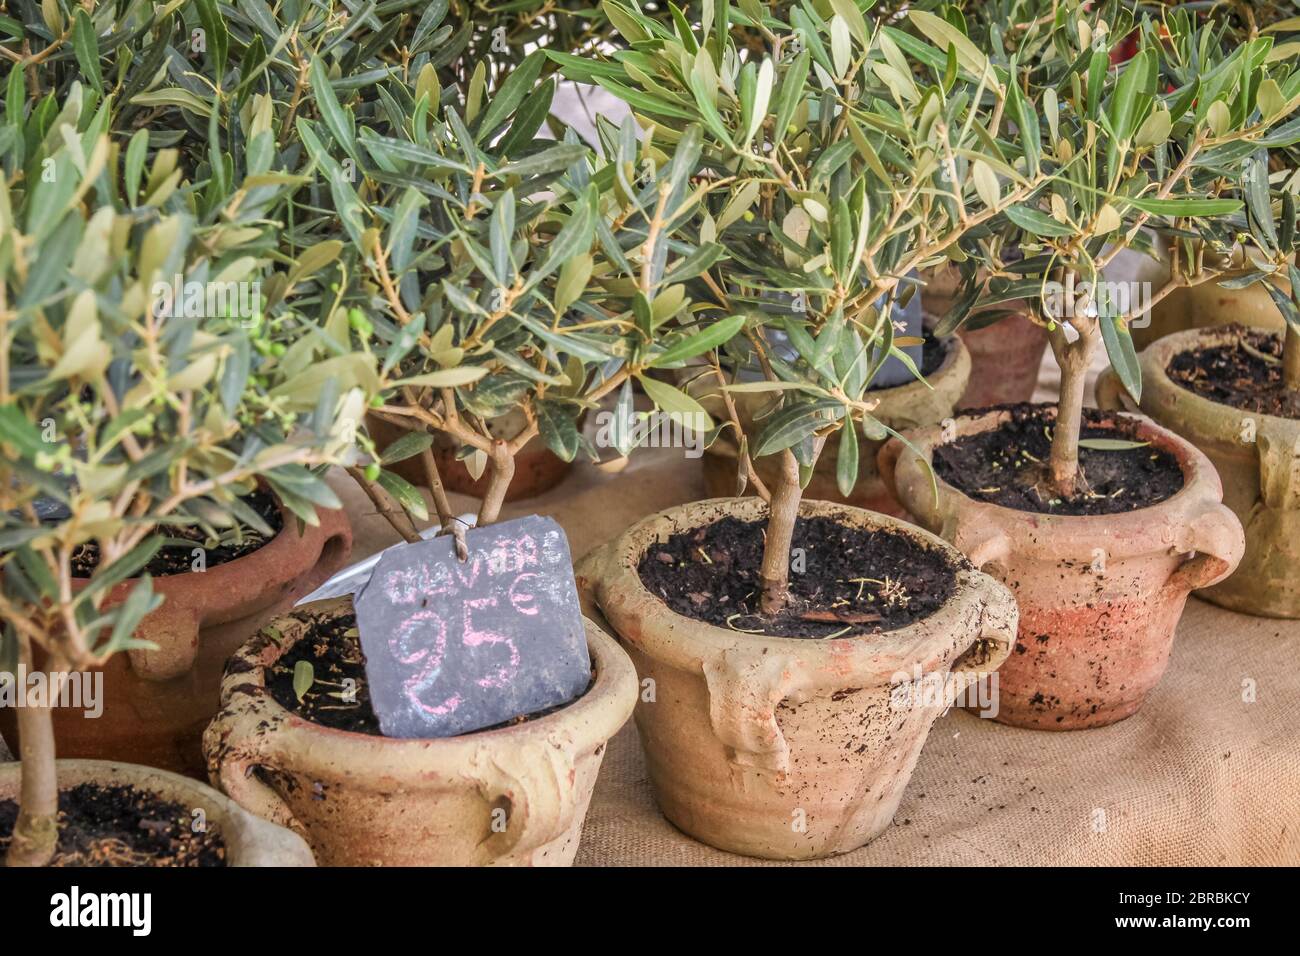 Small olive trees at a market in the village of Gordes, Provence, France Stock Photo